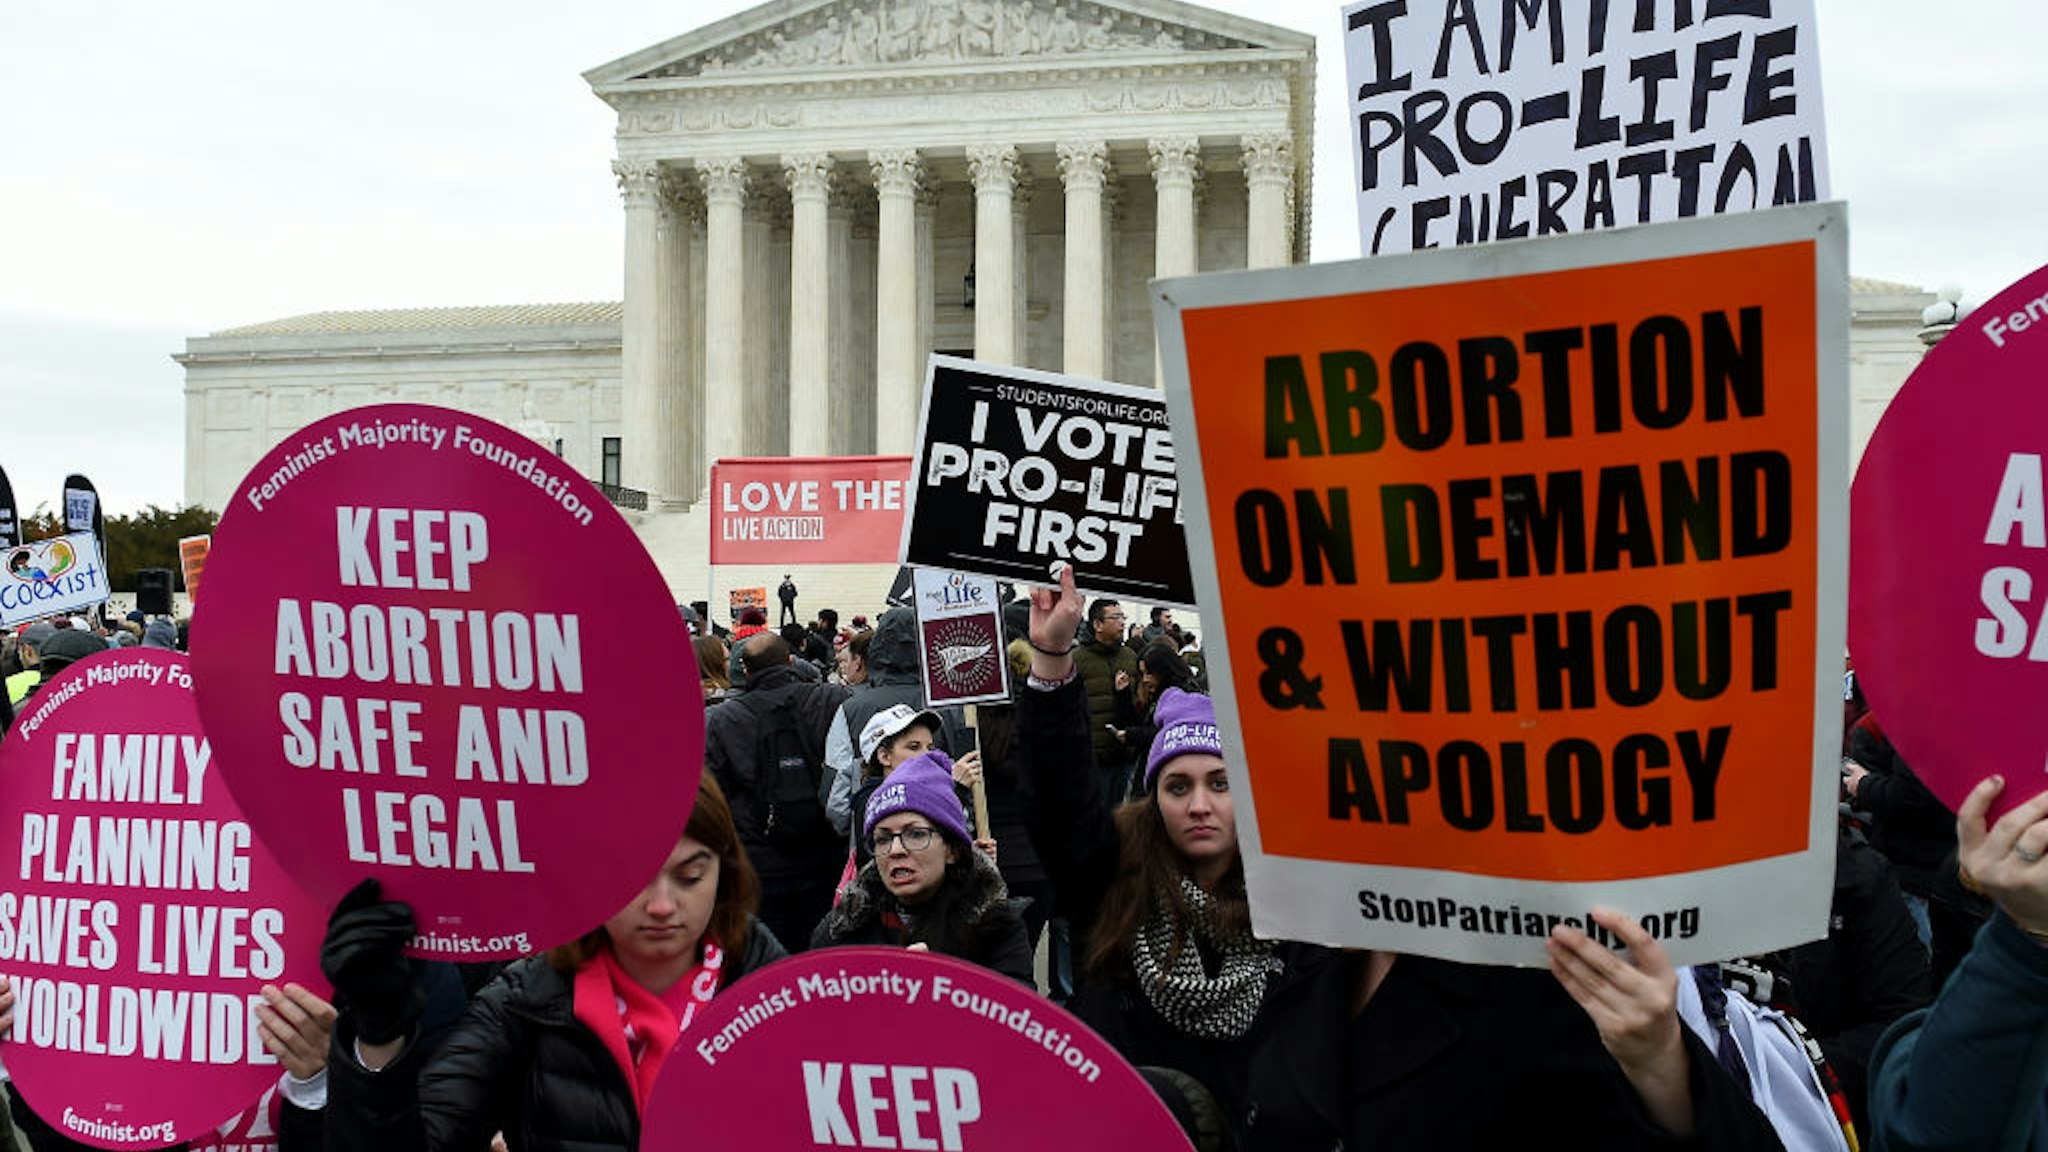 Pro-choice and pro-life activists demonstrate in front of the the US Supreme Court during the 47th annual March for Life on January 24, 2020 in Washington, DC. - Activists gathered in the nation's capital for the annual event to mark the anniversary of the Supreme Court Roe v. Wade ruling that legalized abortion in 1973.